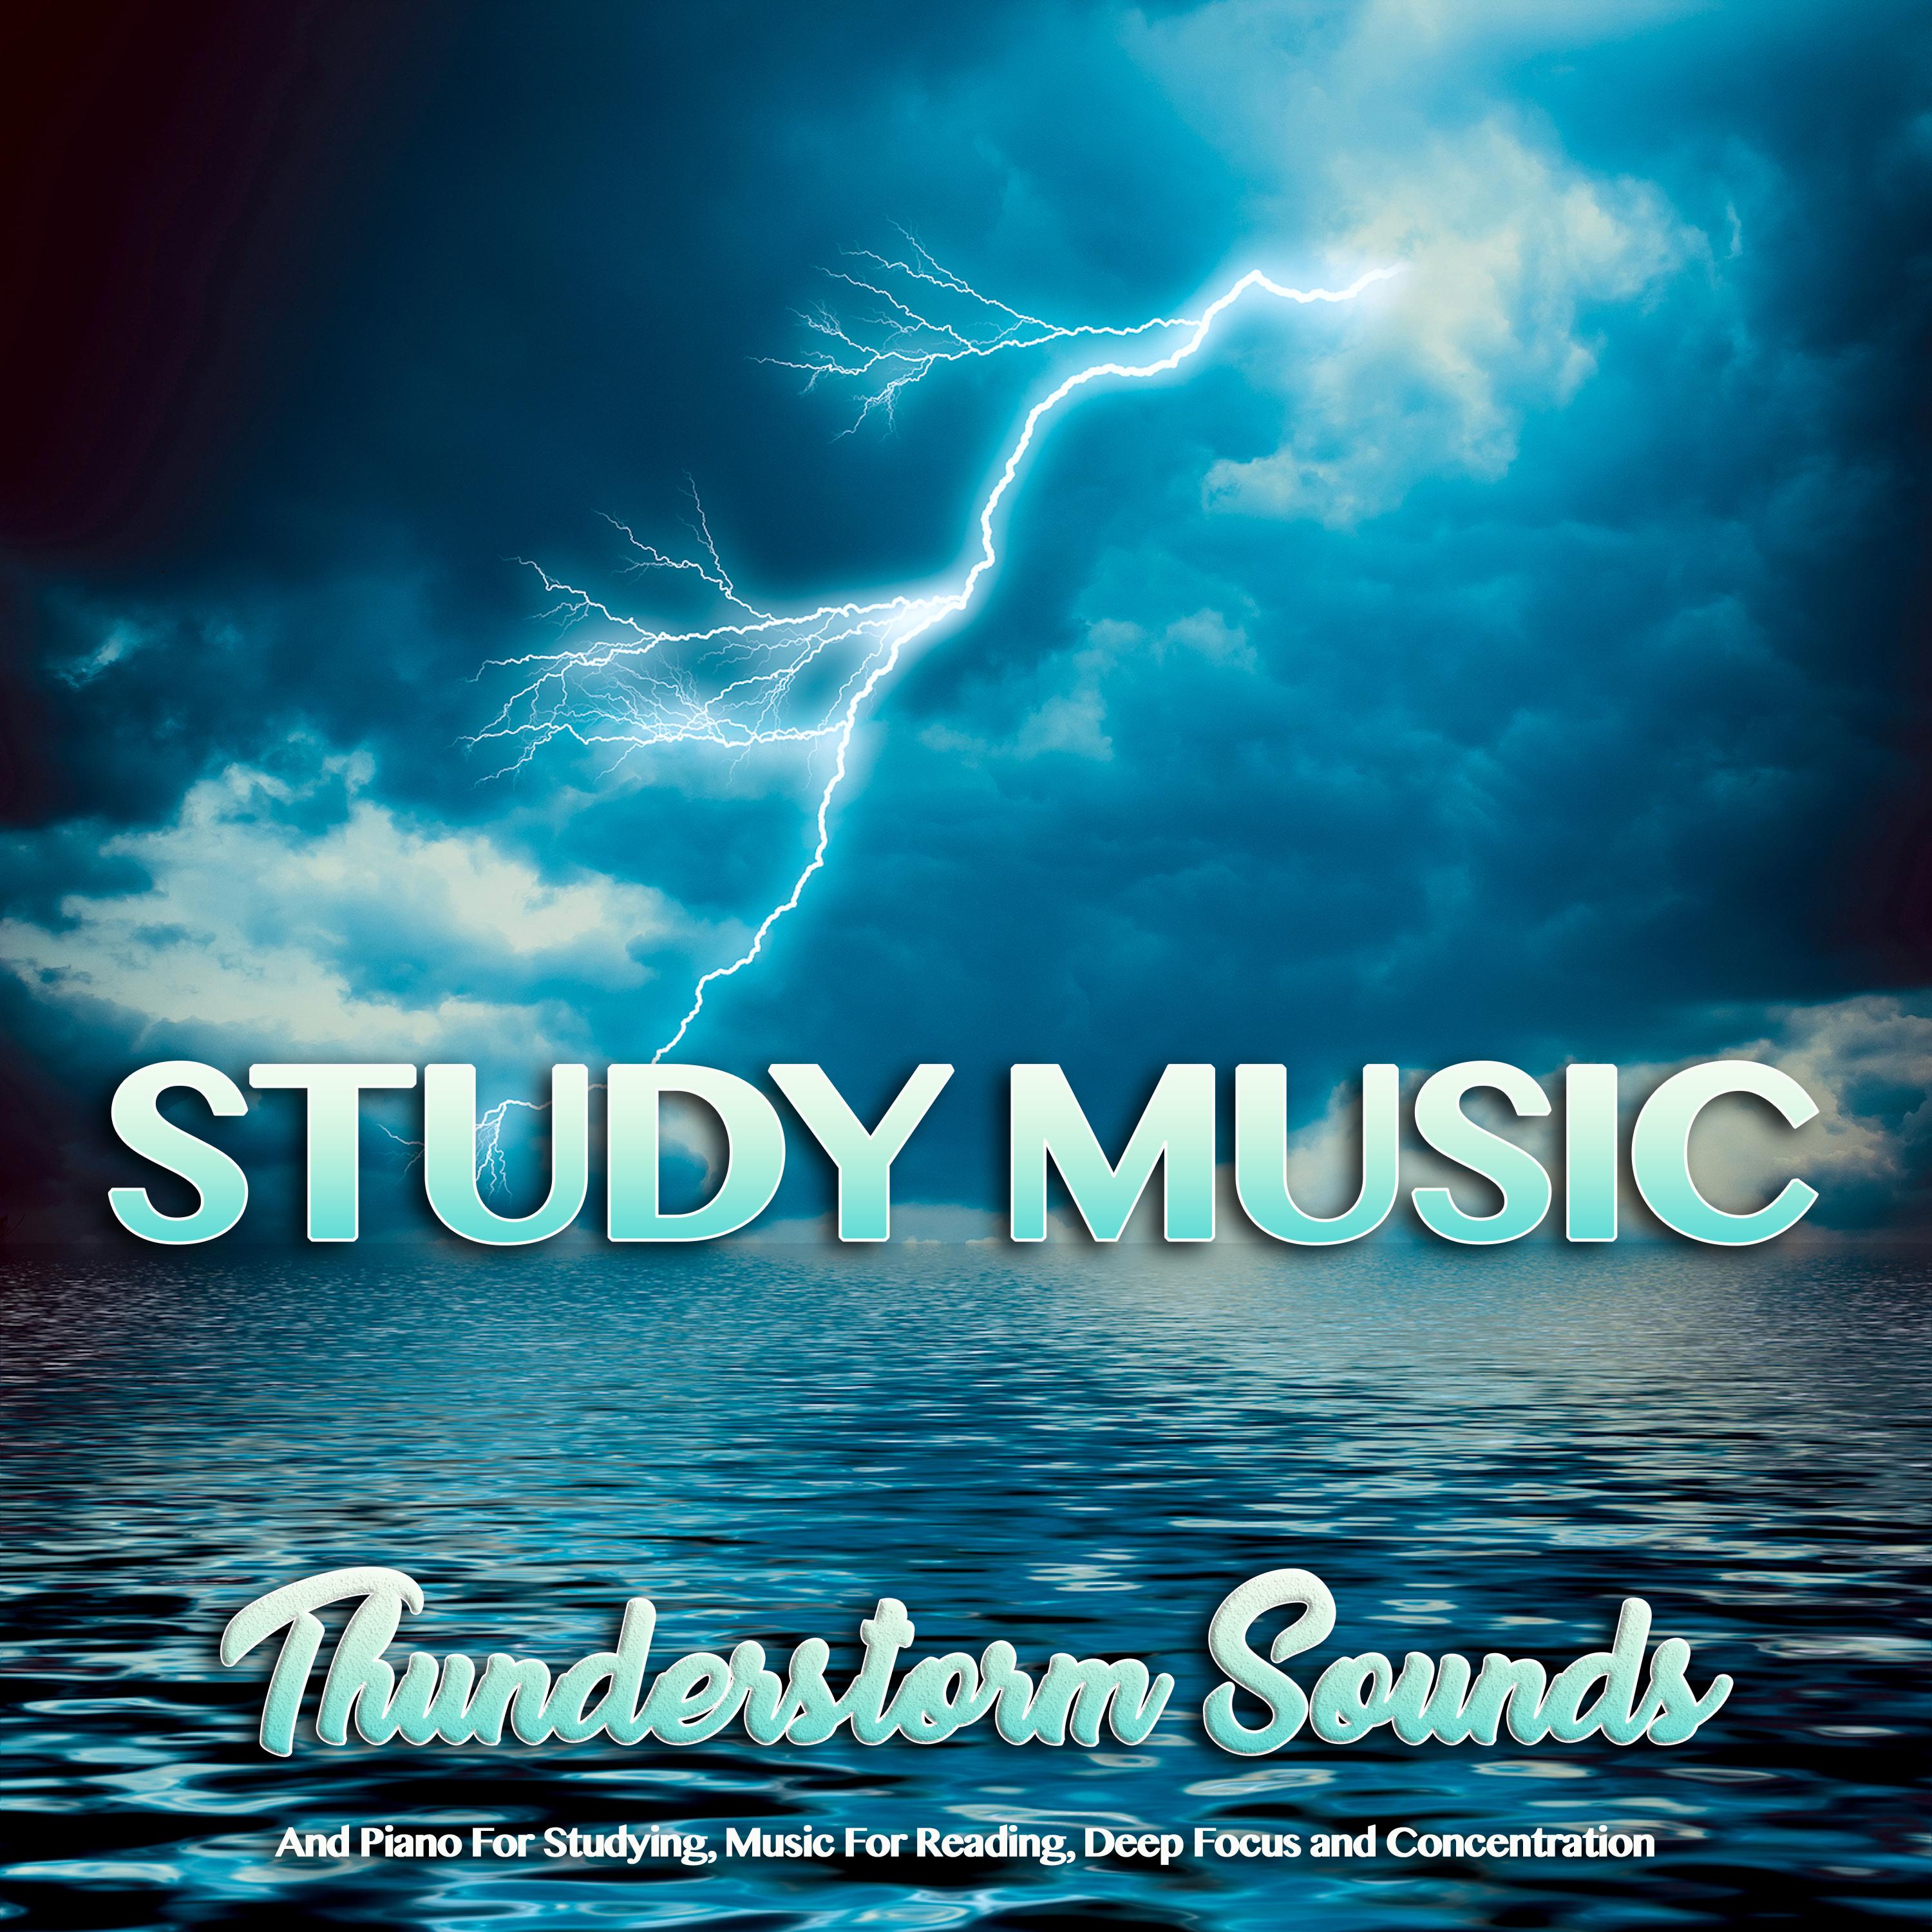 Sounds of a Thunderstorm and Music For Studying